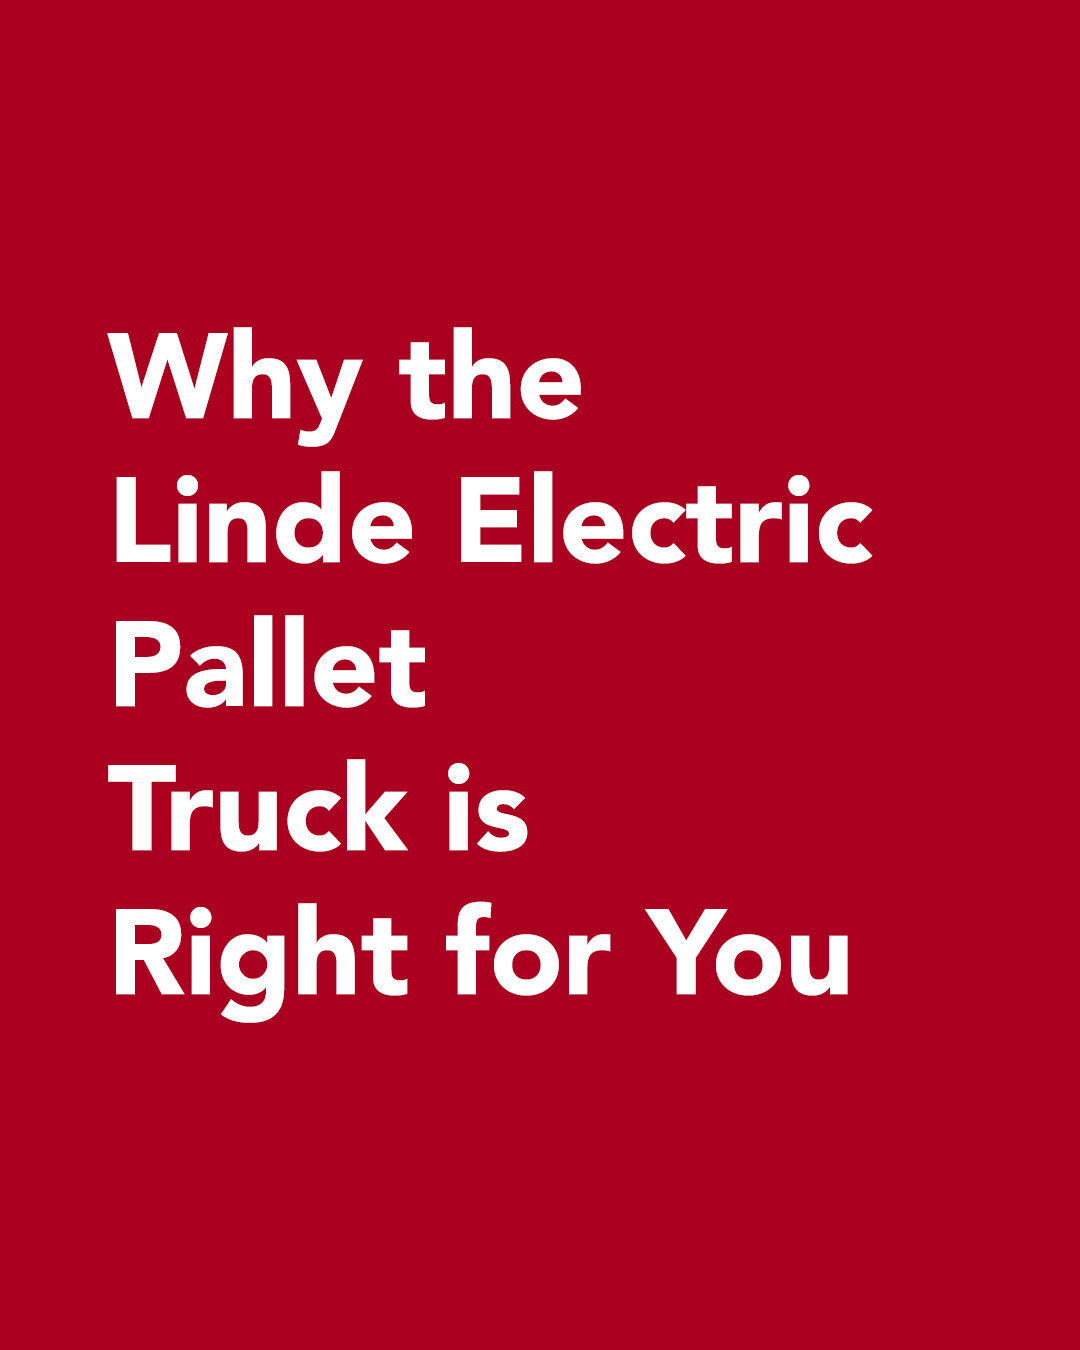 ⚡ Linde electric pallet trucks offer something for every operating environment. ⚡

Swipe to learn more about why these would make a valuable addition to your warehouse fleet ⬅

Or 

Hit the contact button on our profile and discuss your options with one of our specialists today! 📞